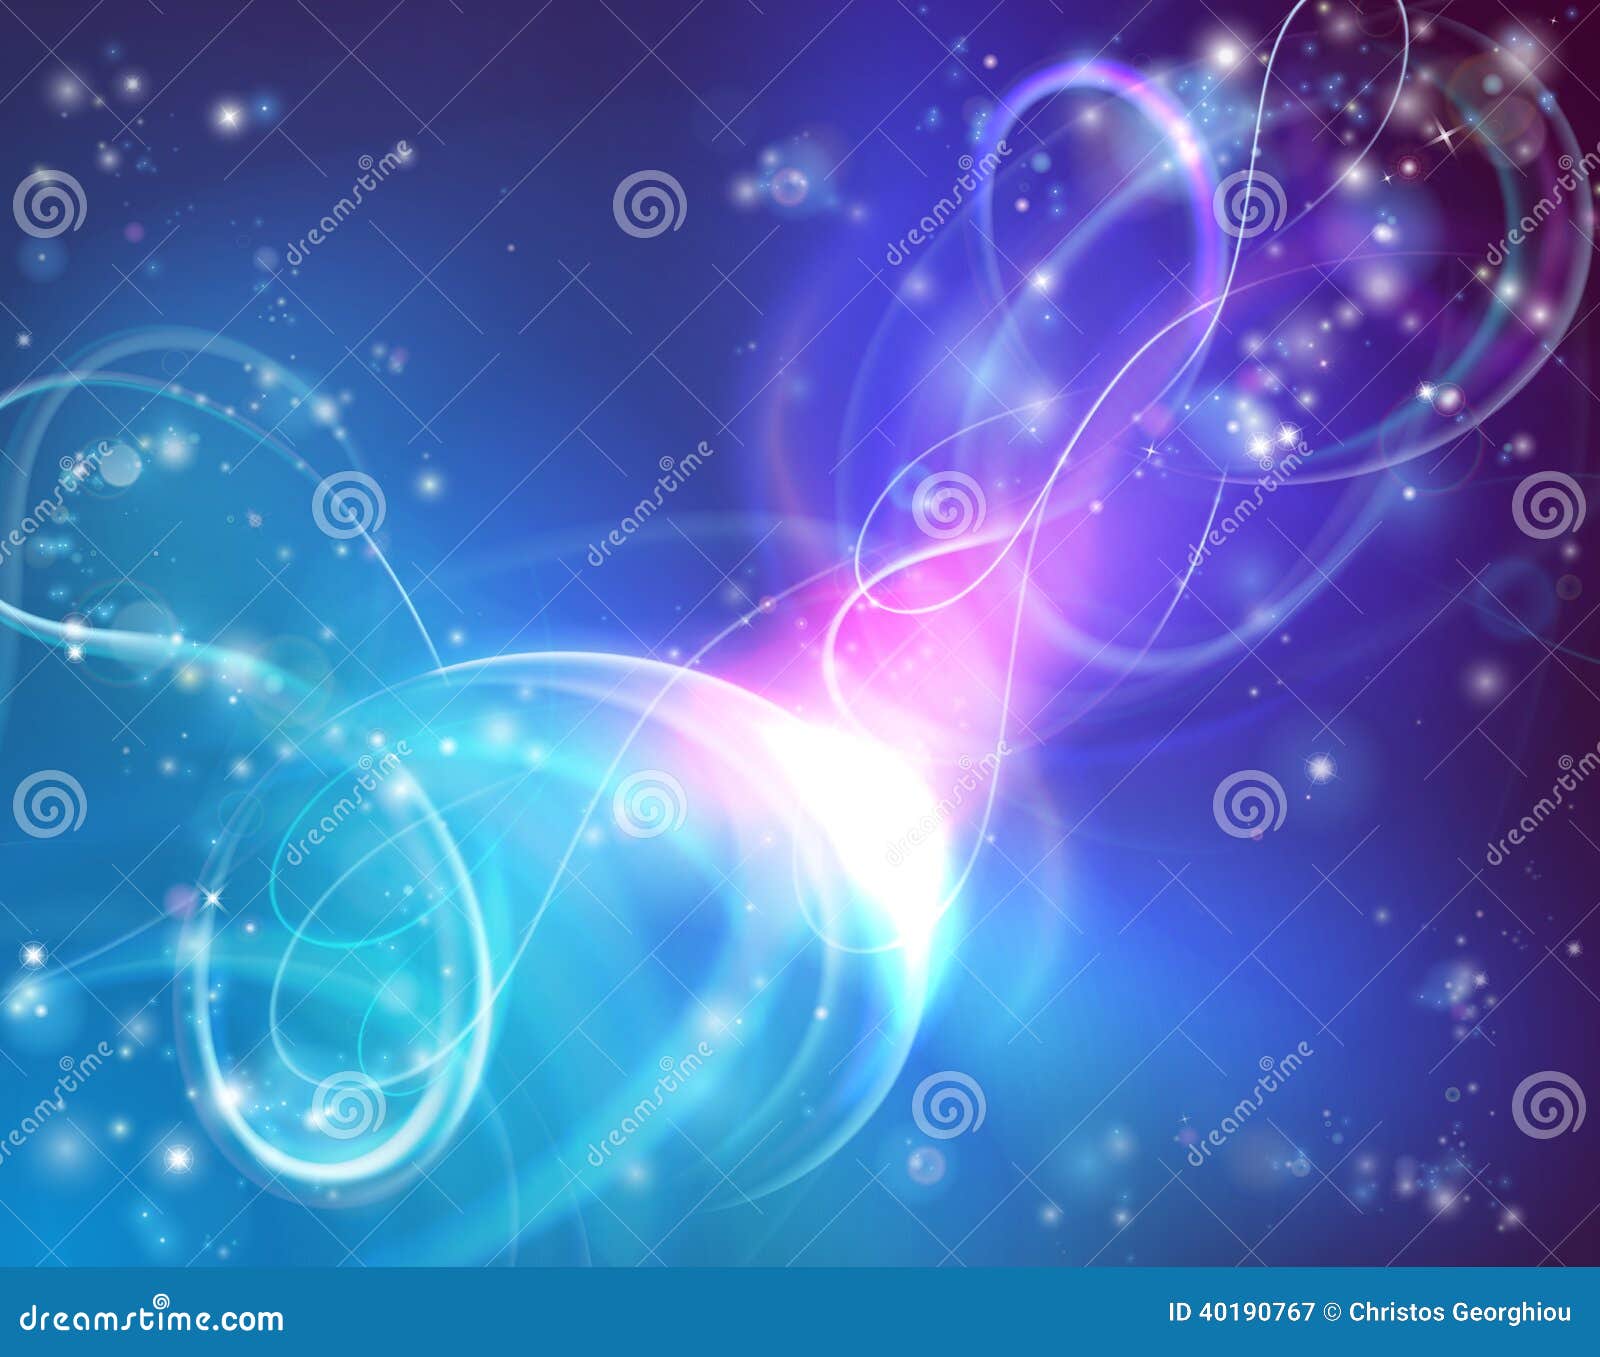 bright abstract background